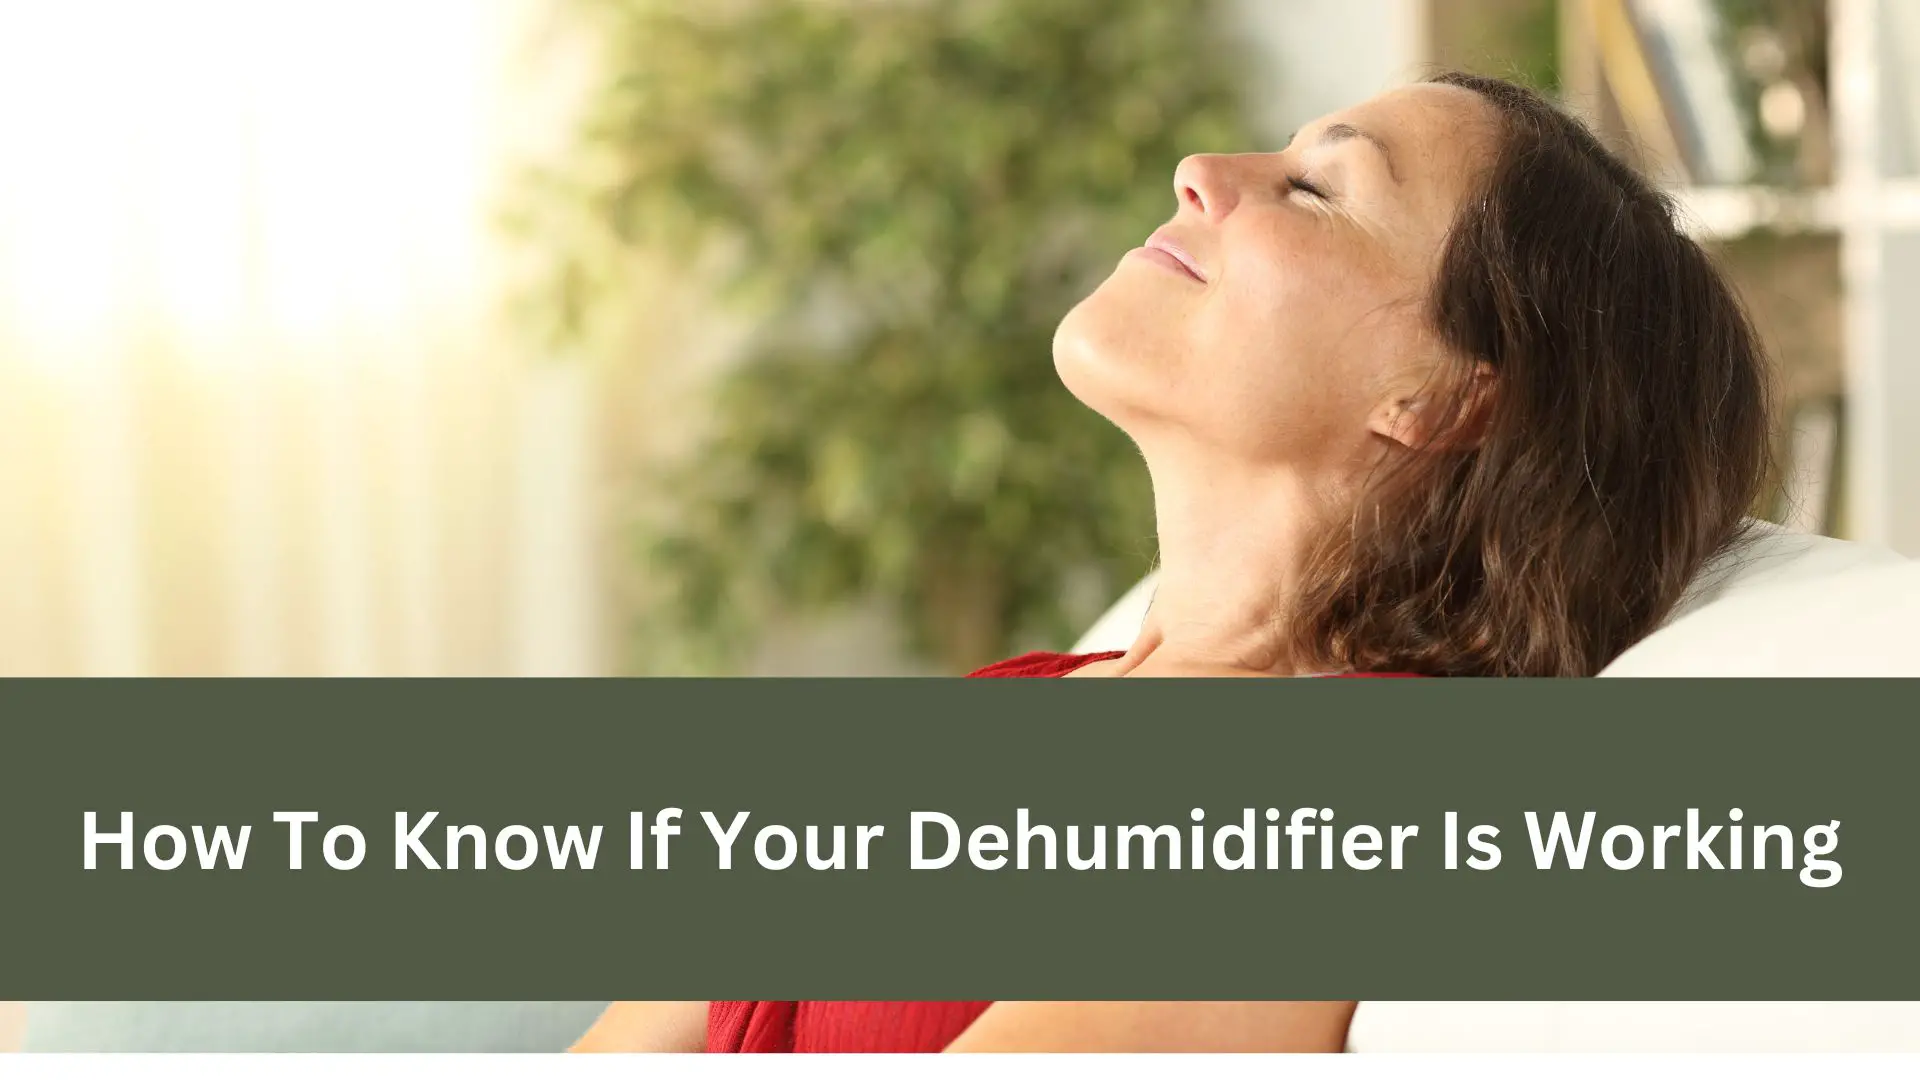 How To Know If Your Dehumidifier Is Working